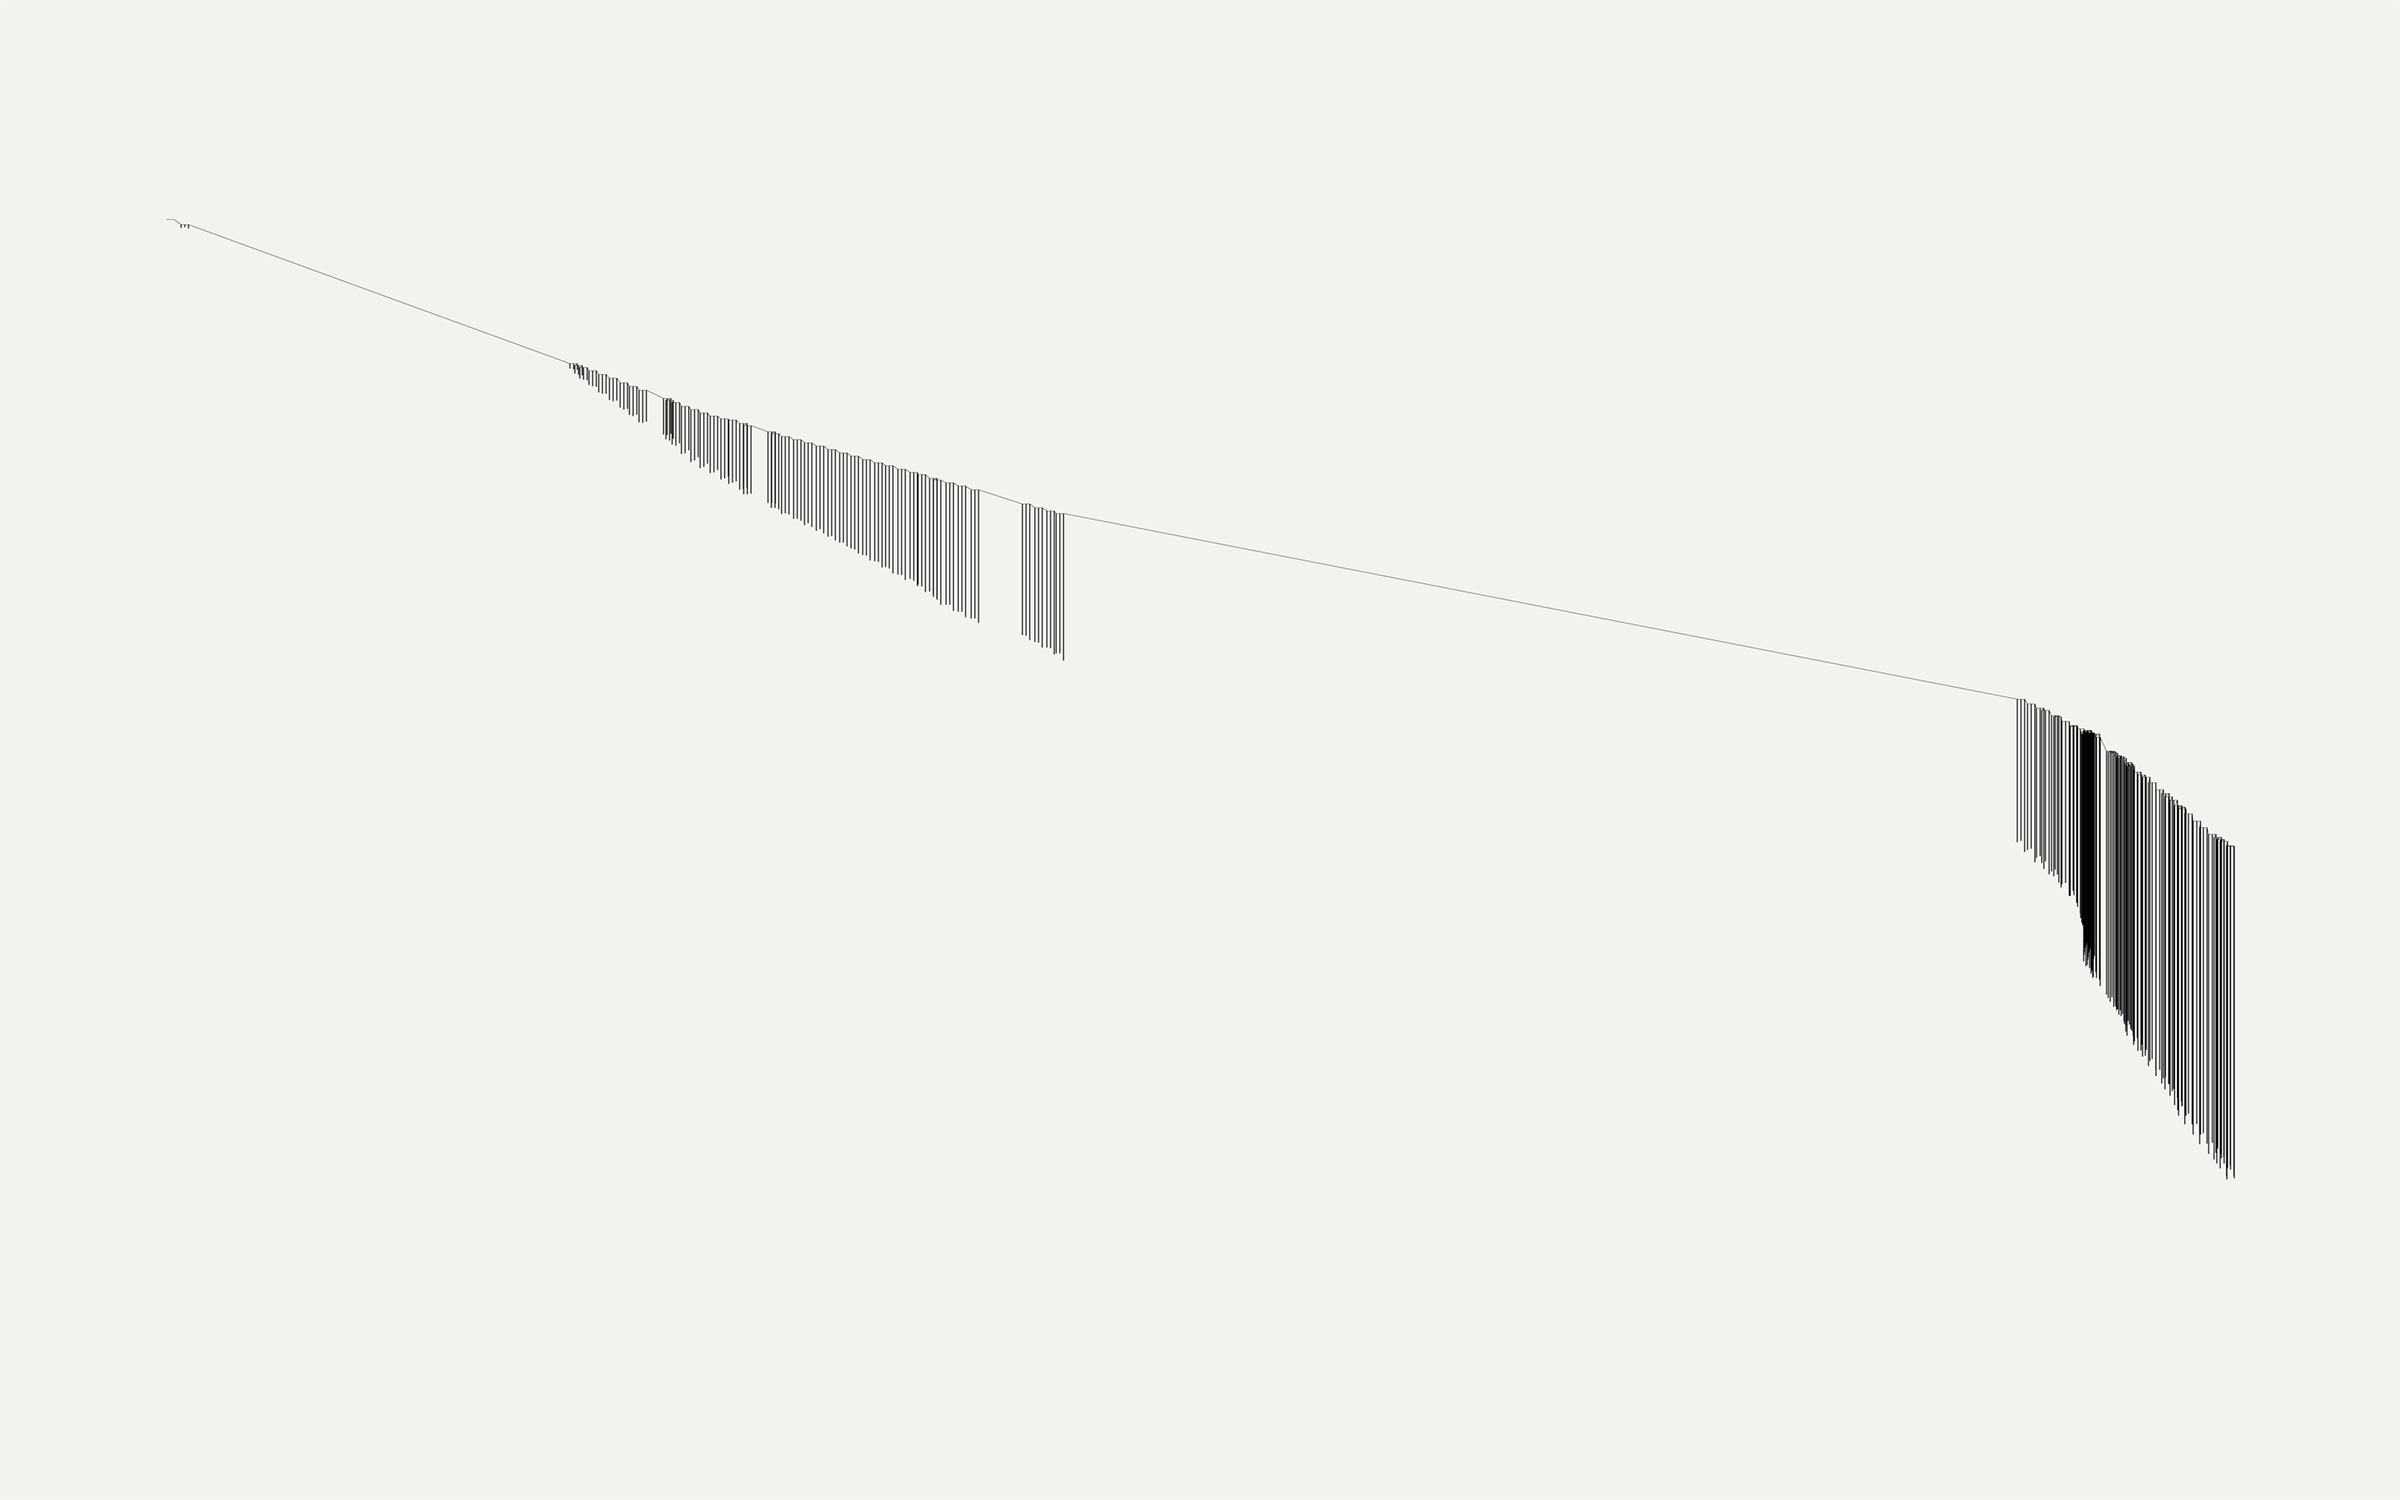 Visualizing the distance between GPS coordinates mapped to what3words trigrams.